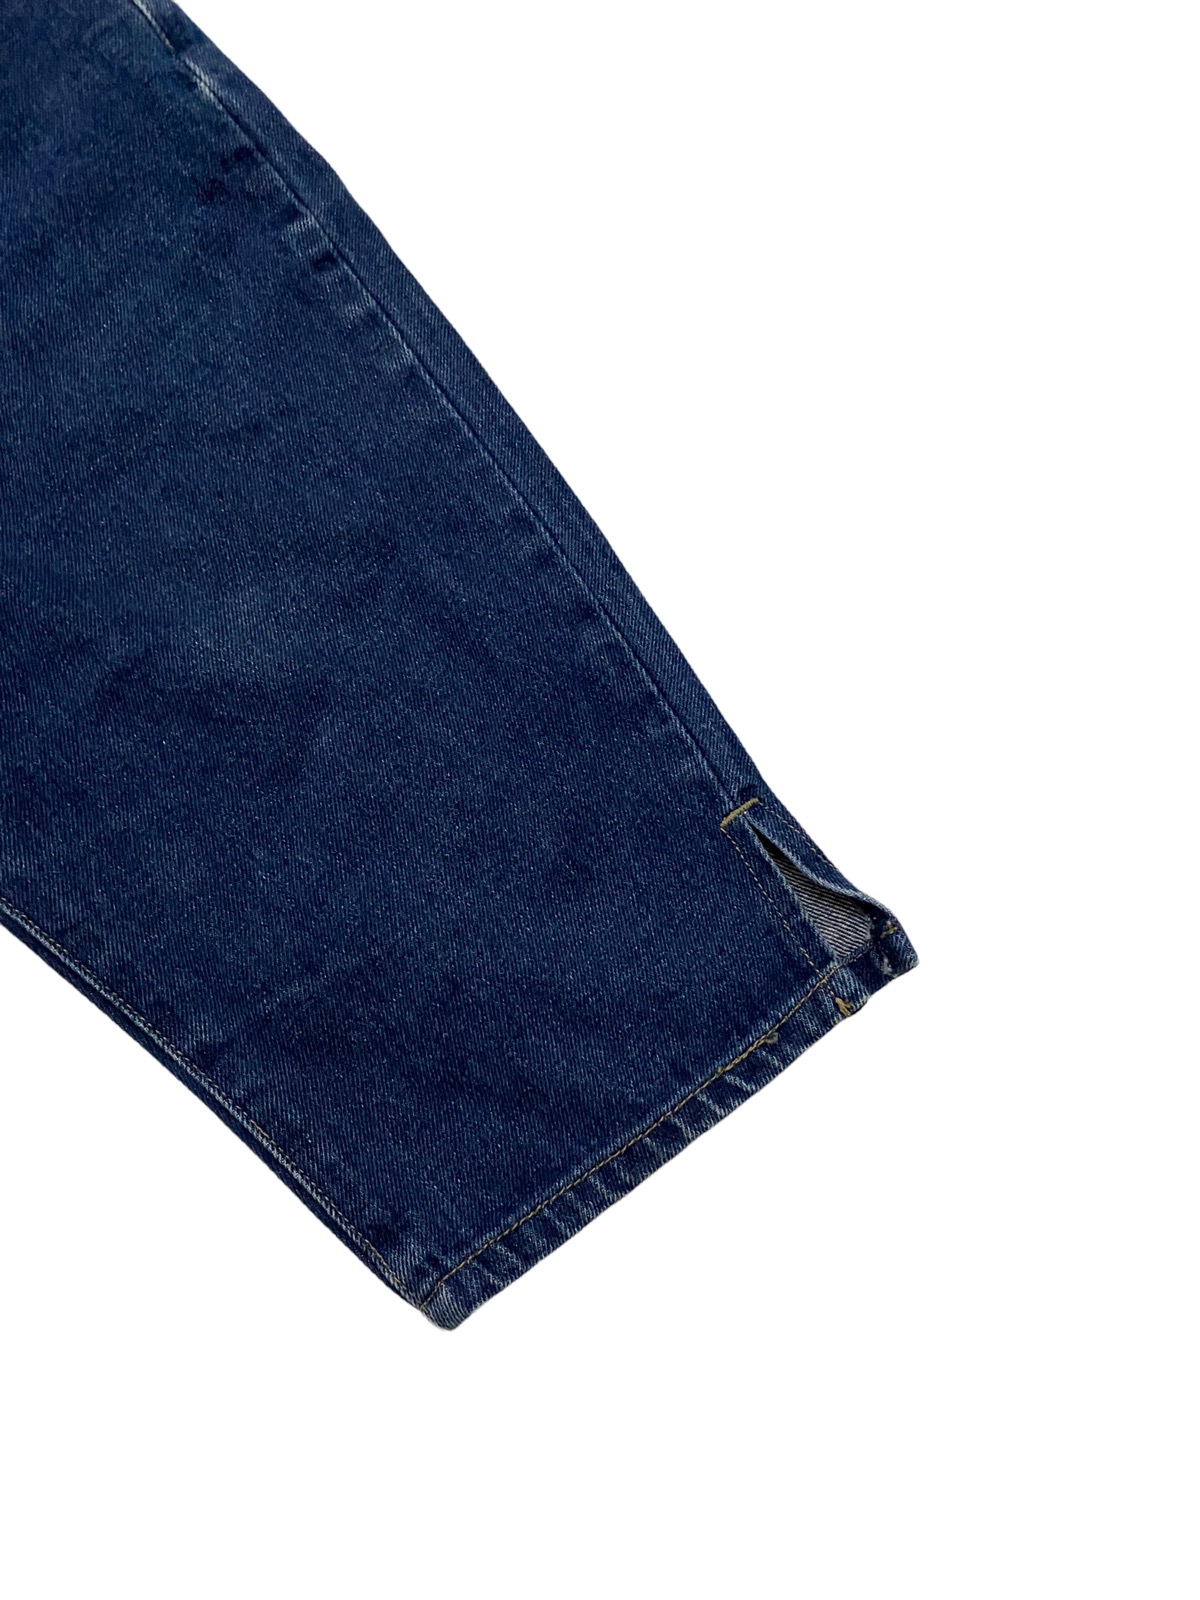 Vintage Stussy Short Jeans Made in USA - 10